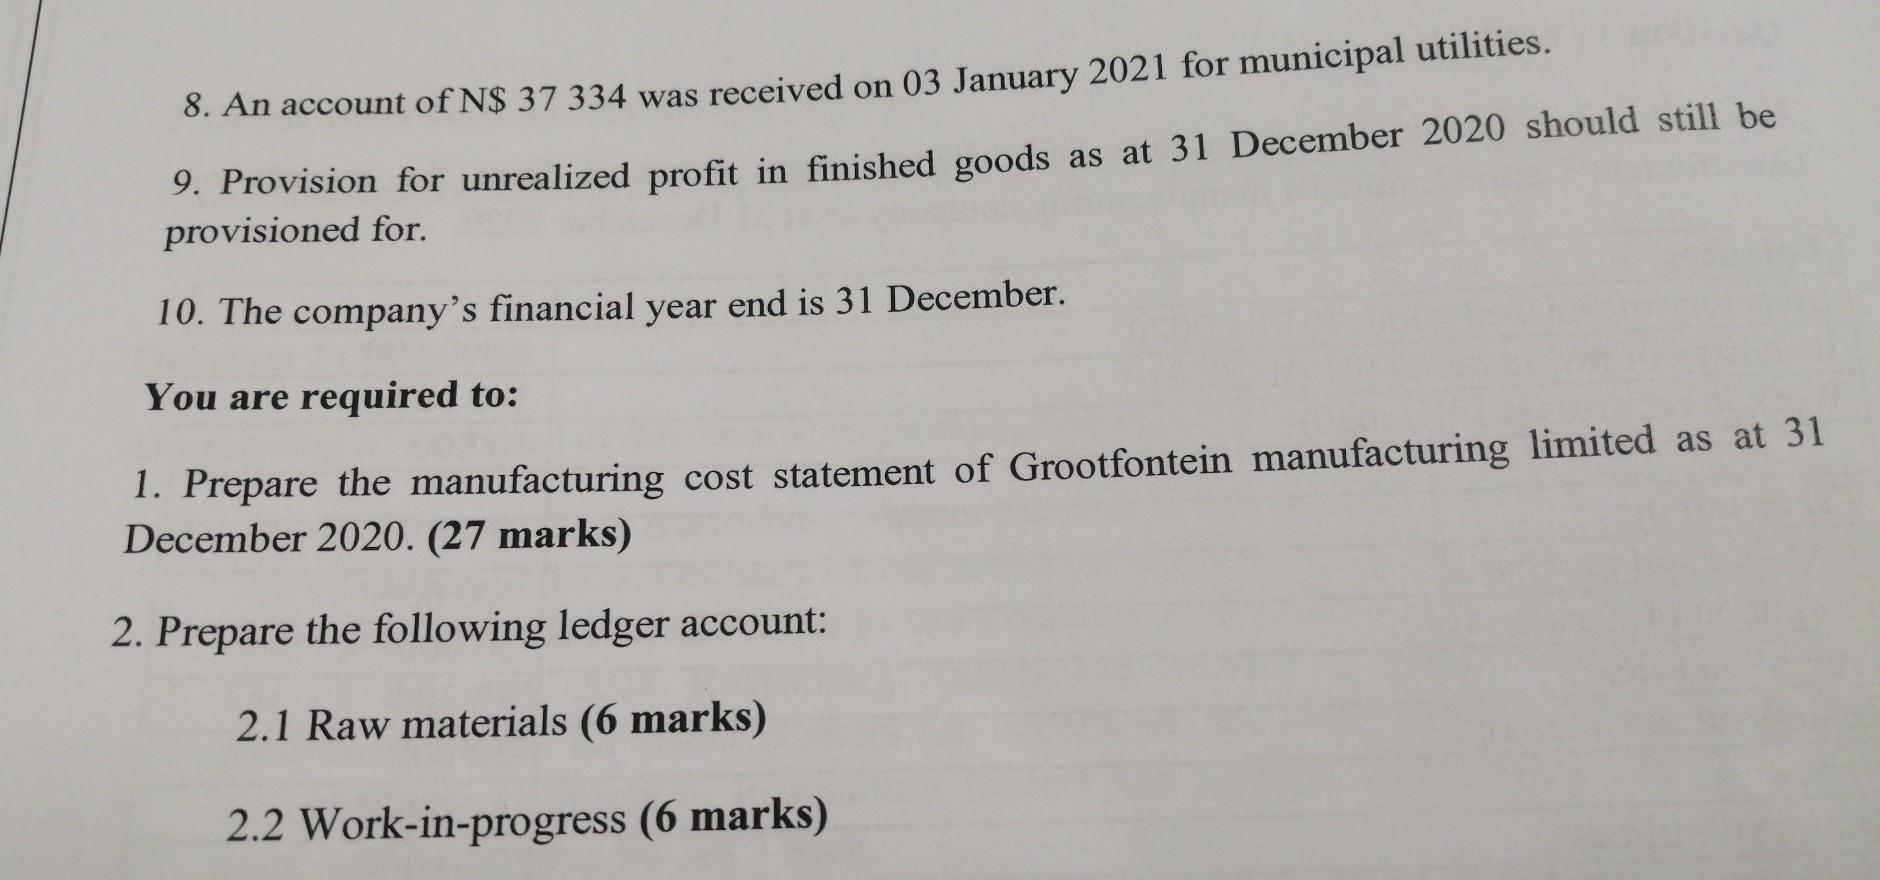 8. An account of N$ 37 334 was received on 03 January 2021 for municipal utilities. 9. Provision for unrealized profit in fin